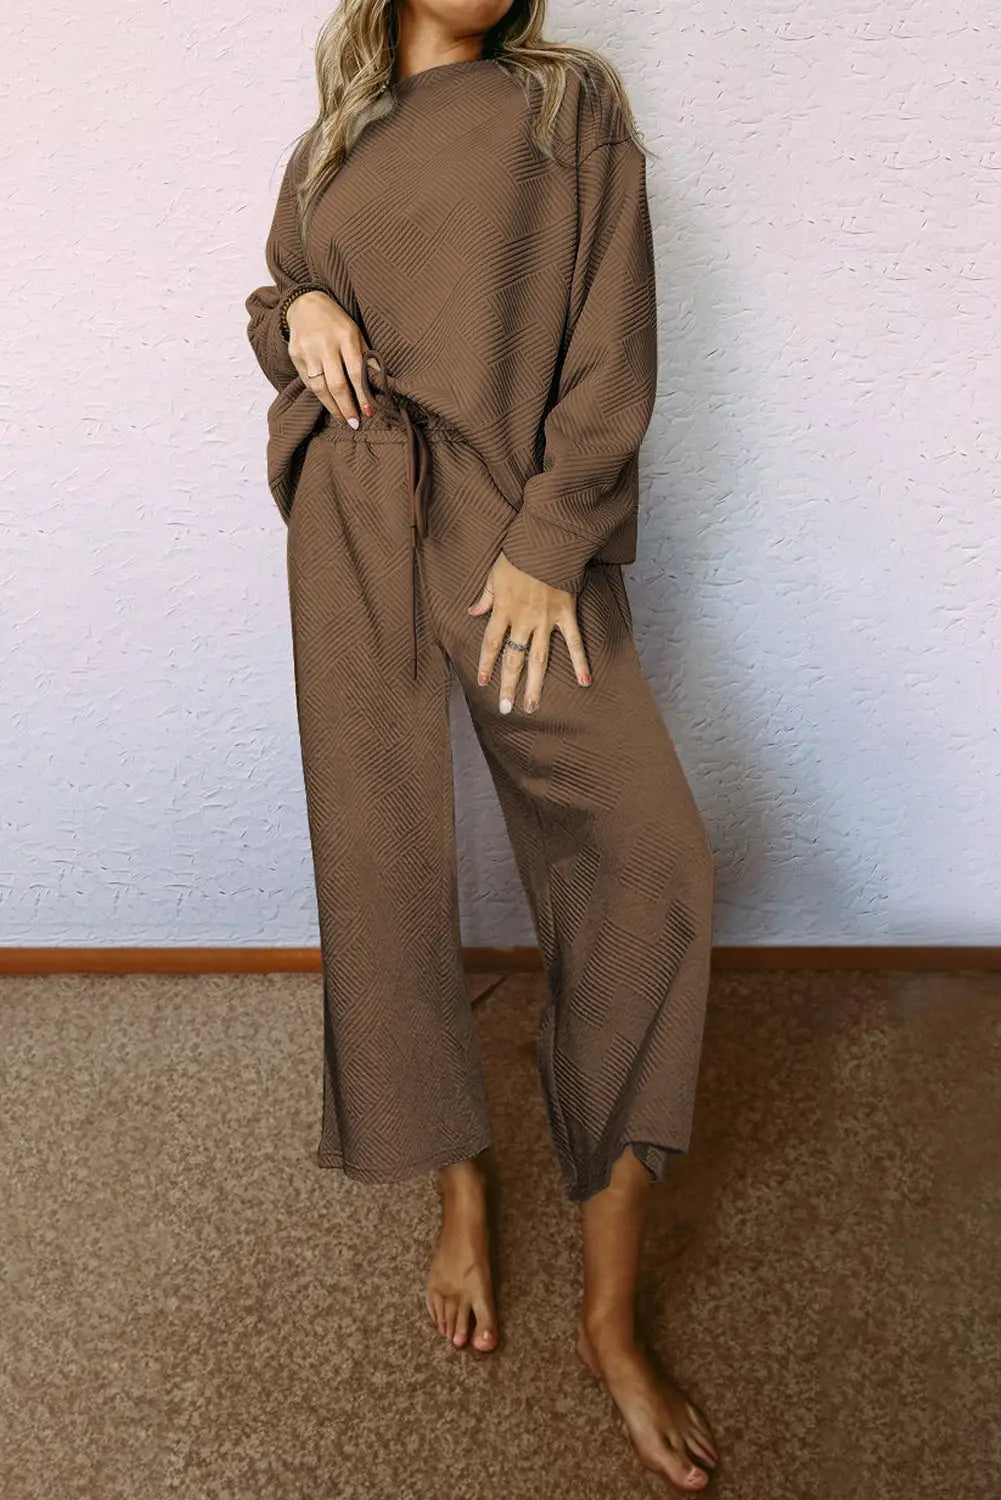 Dark brown ultra loose textured 2pcs slouchy outfit - 2xl / 95% polyester + 5% elastane - pants sets